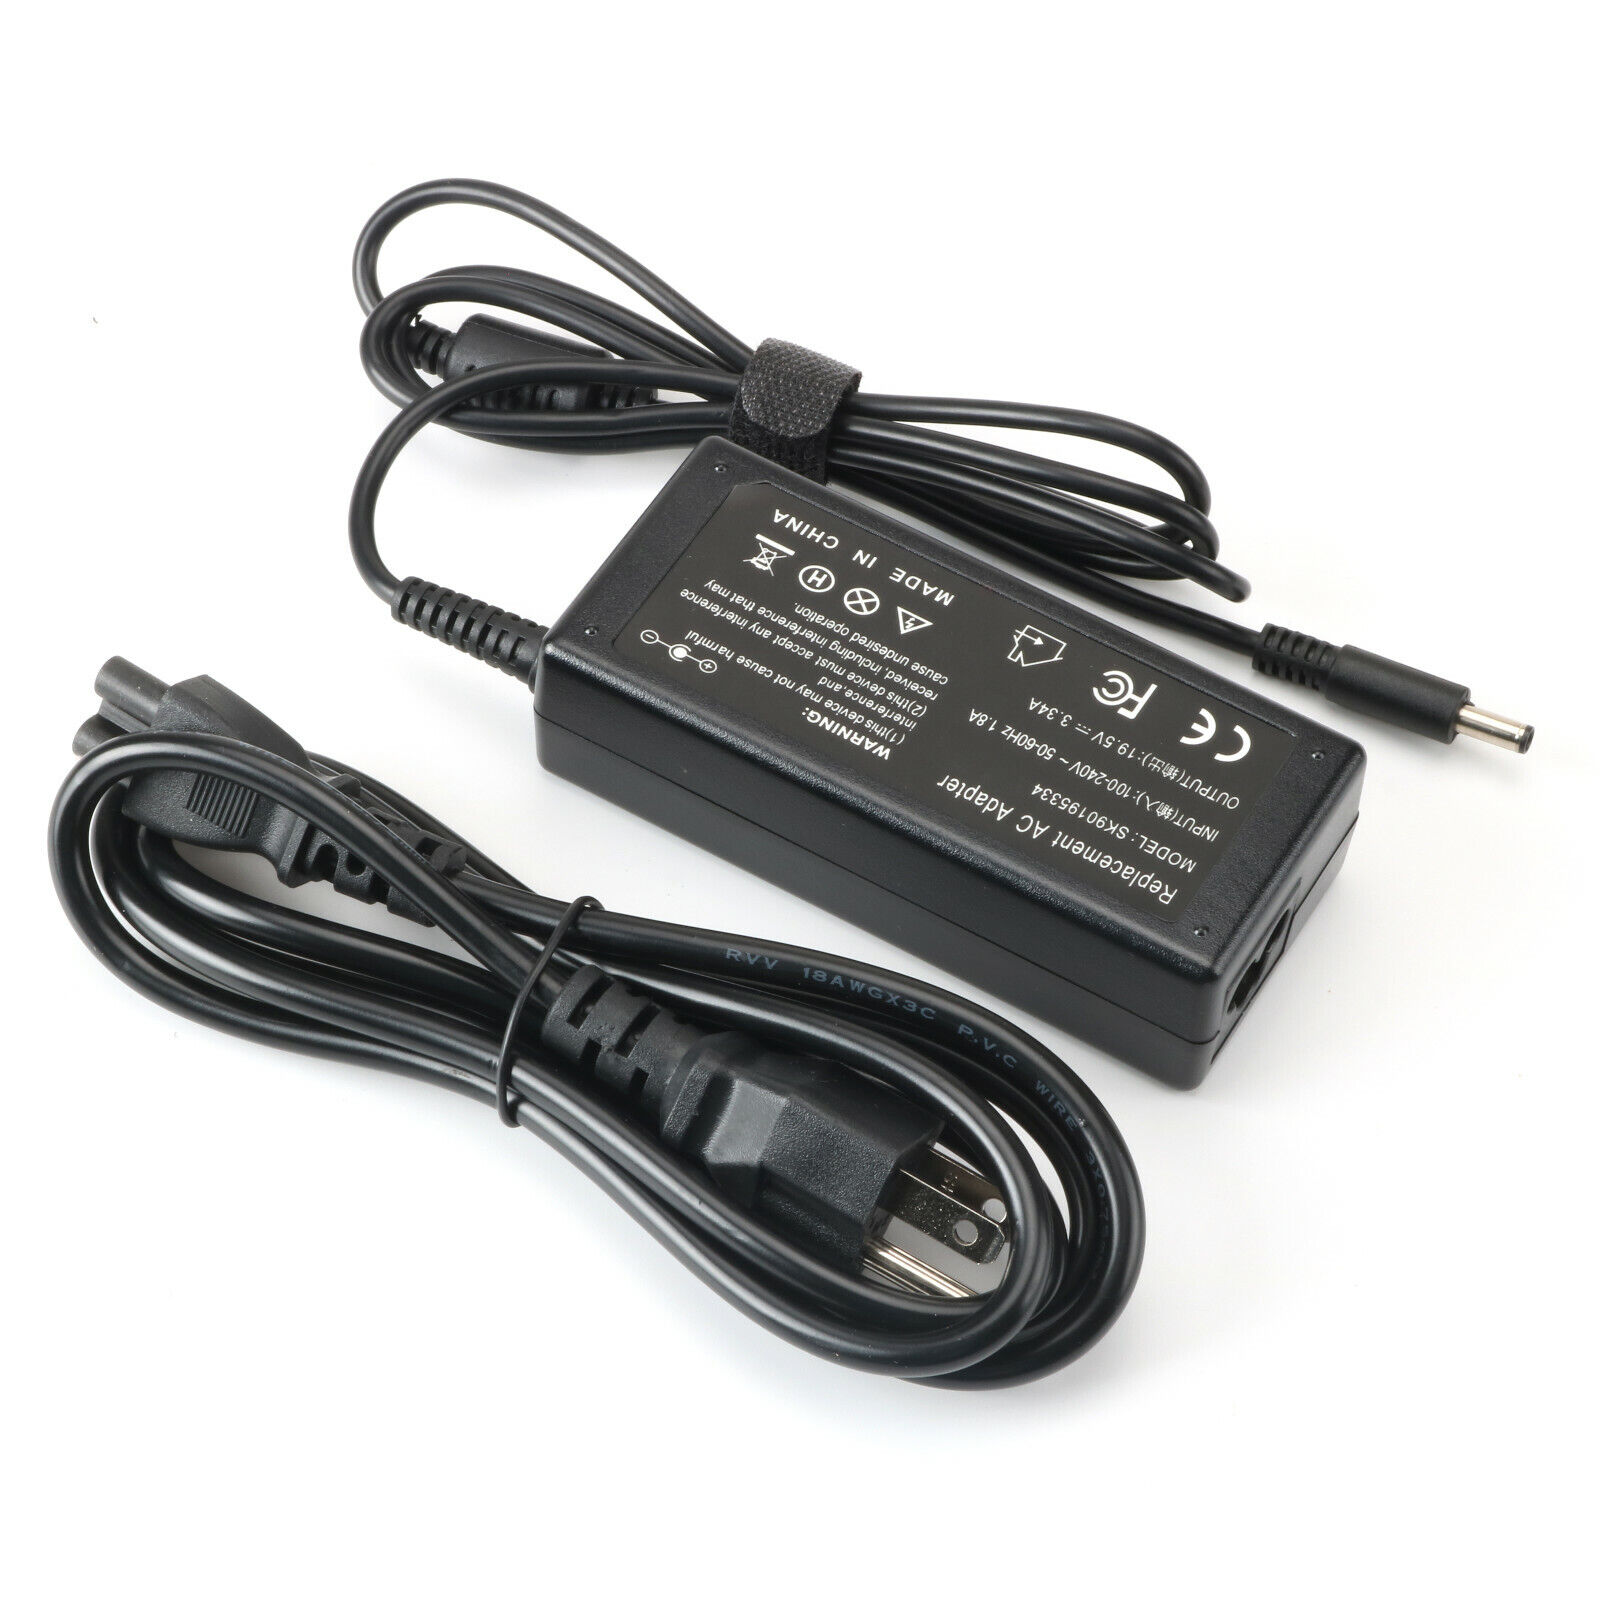 65W Power Supply Cord Adapter Charger for Dell Inspiron i3168 i3252 i3451 i3452